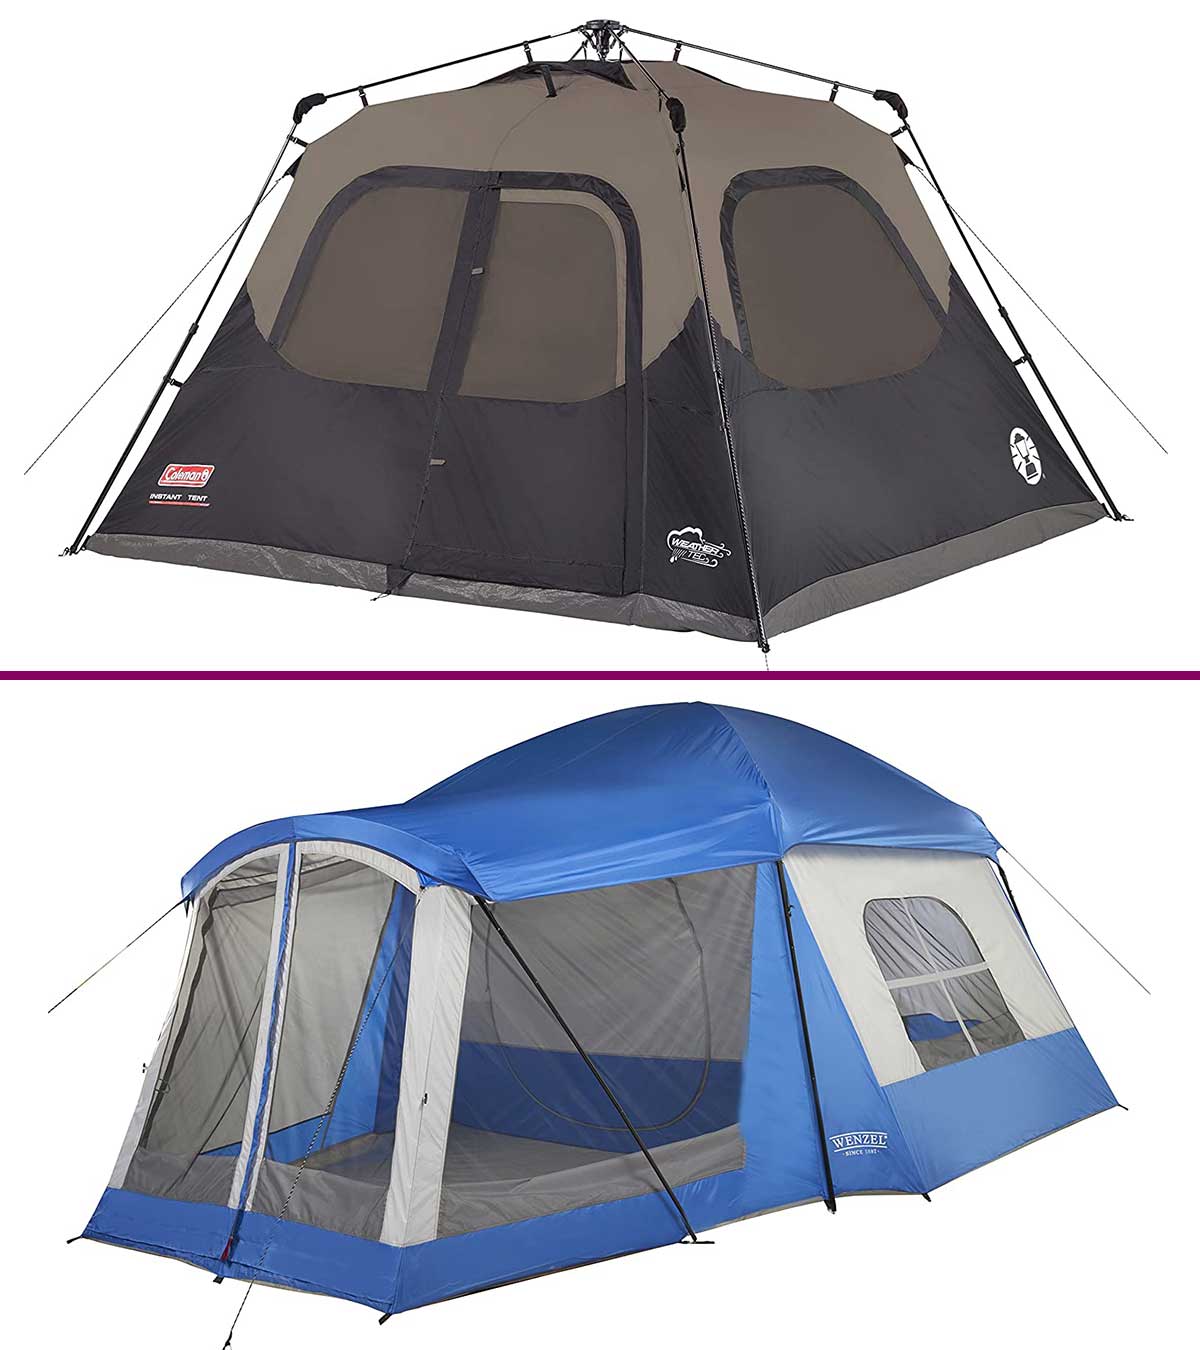 15 Best Instant Tents For Camping in 2022